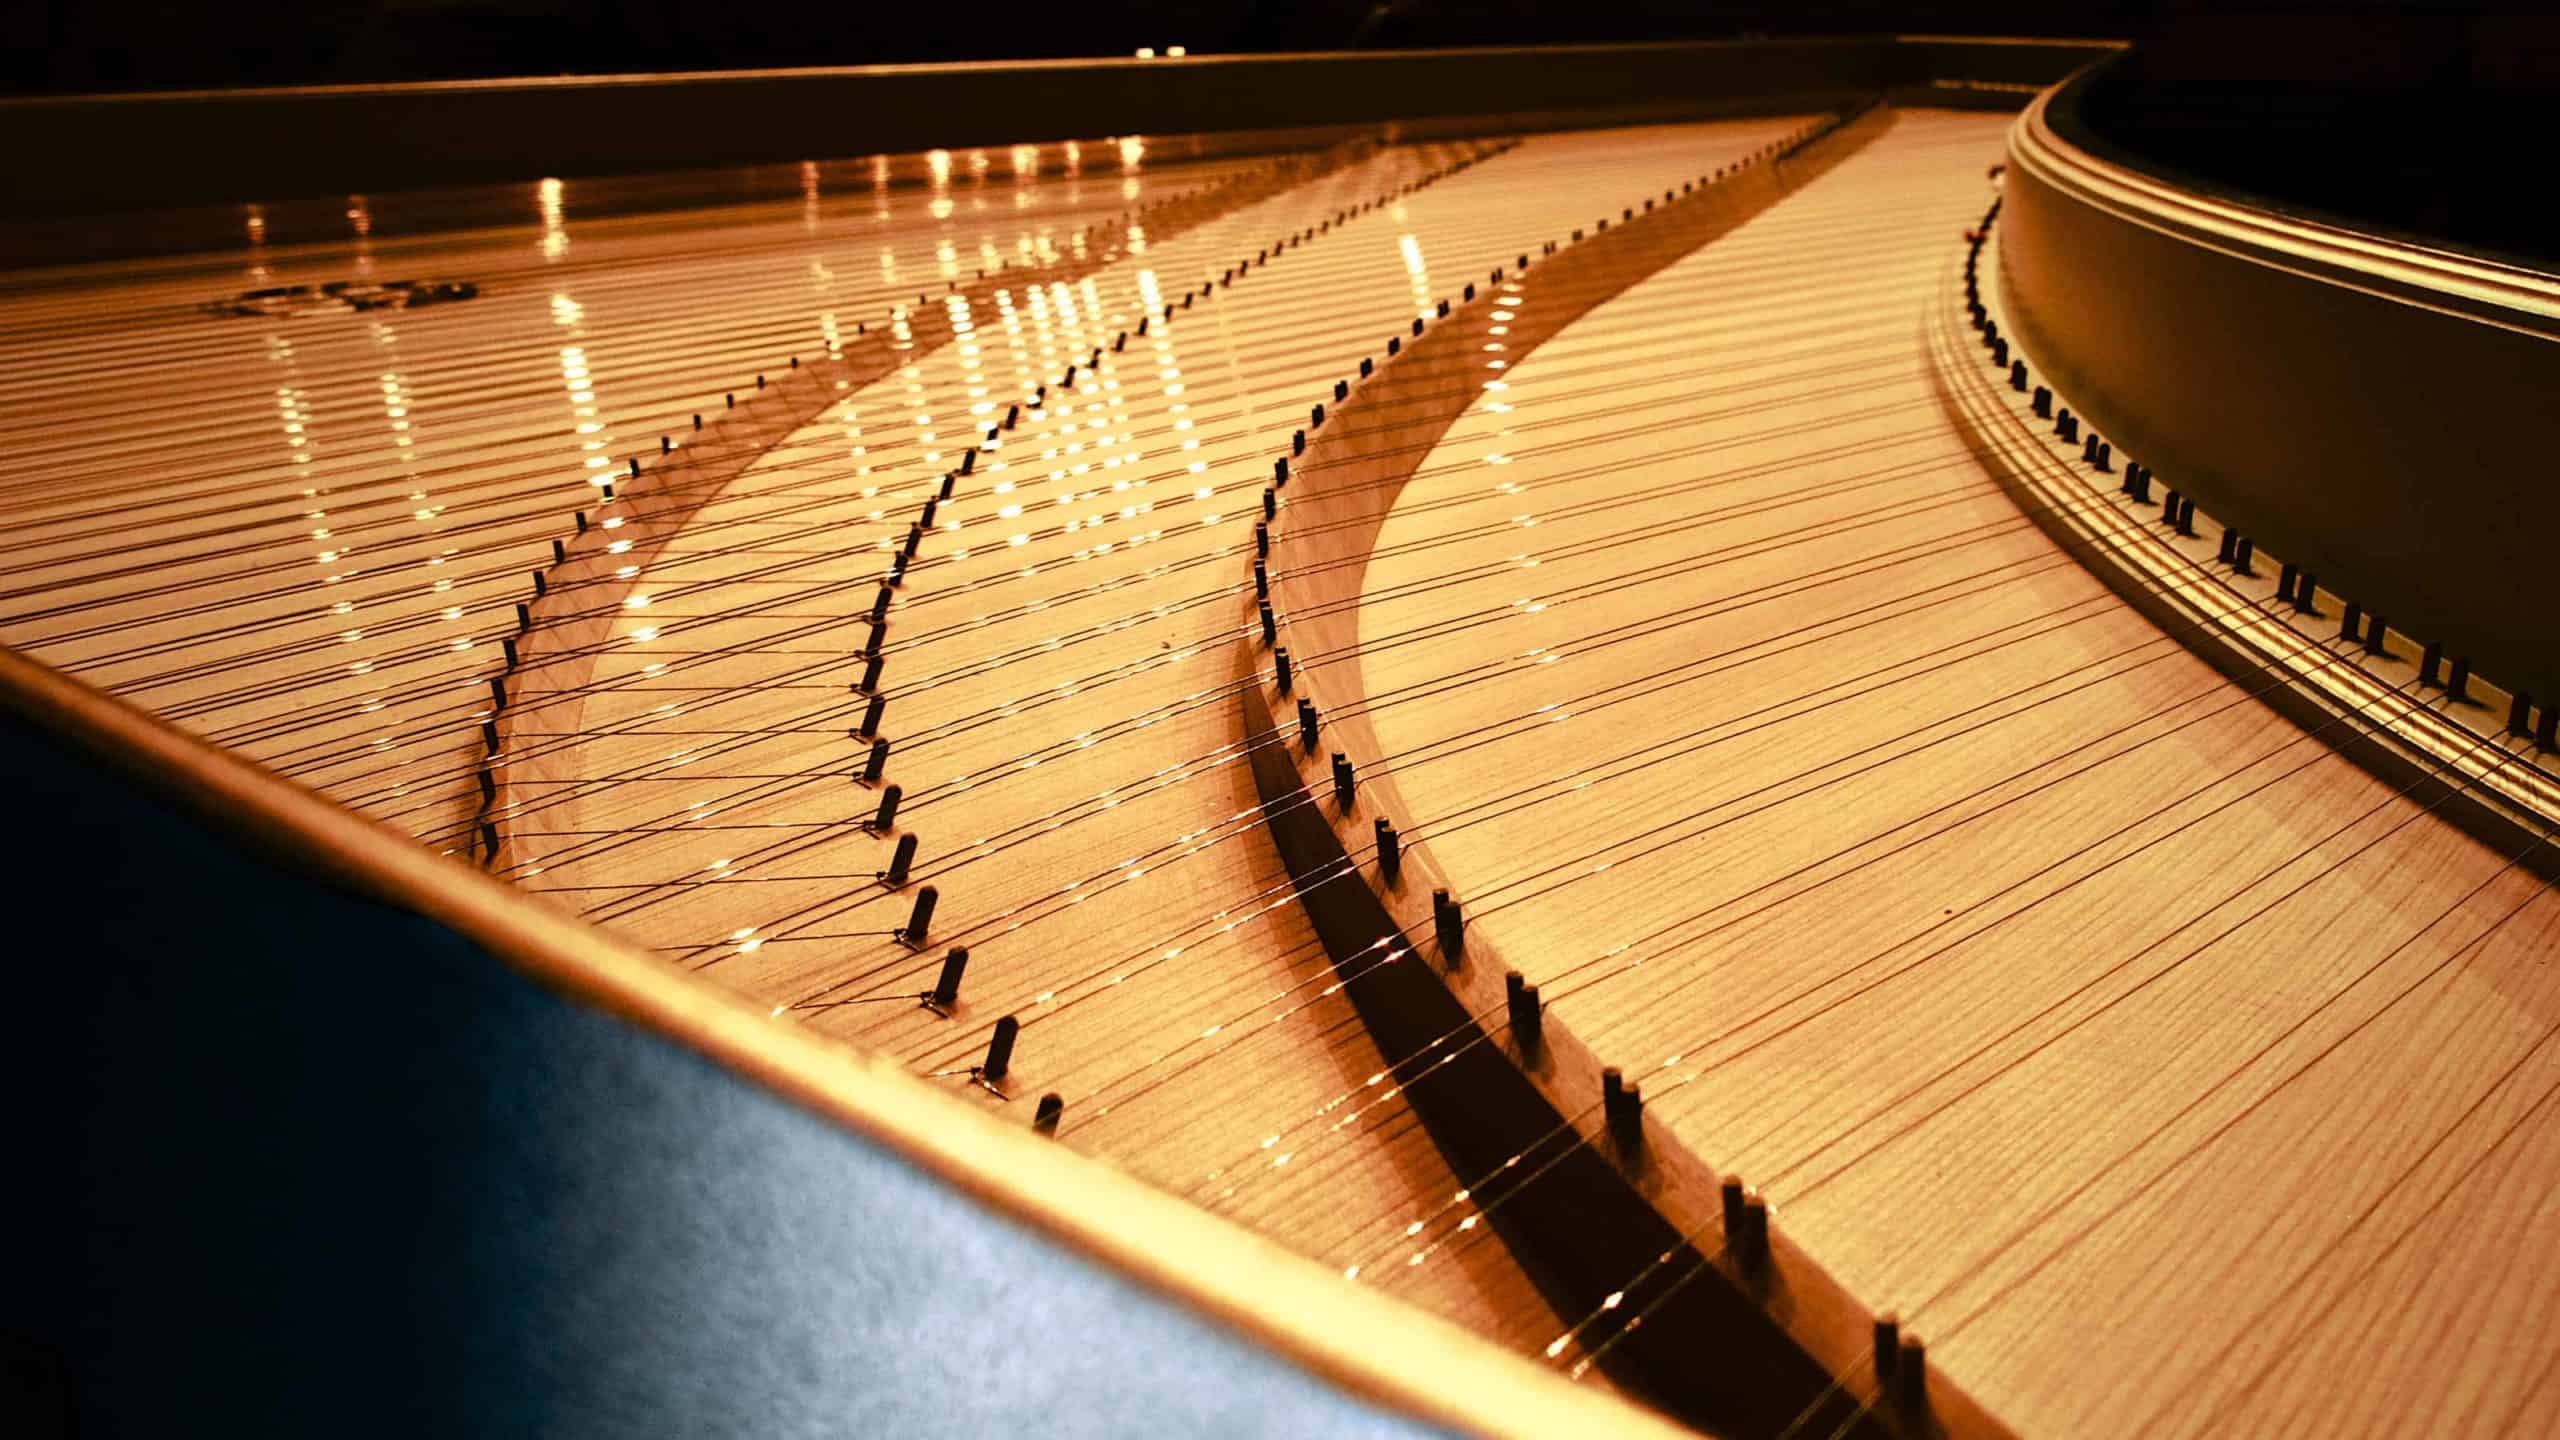 A harpsichord's sounding board curves into the light. Creative commons courtesy photo.